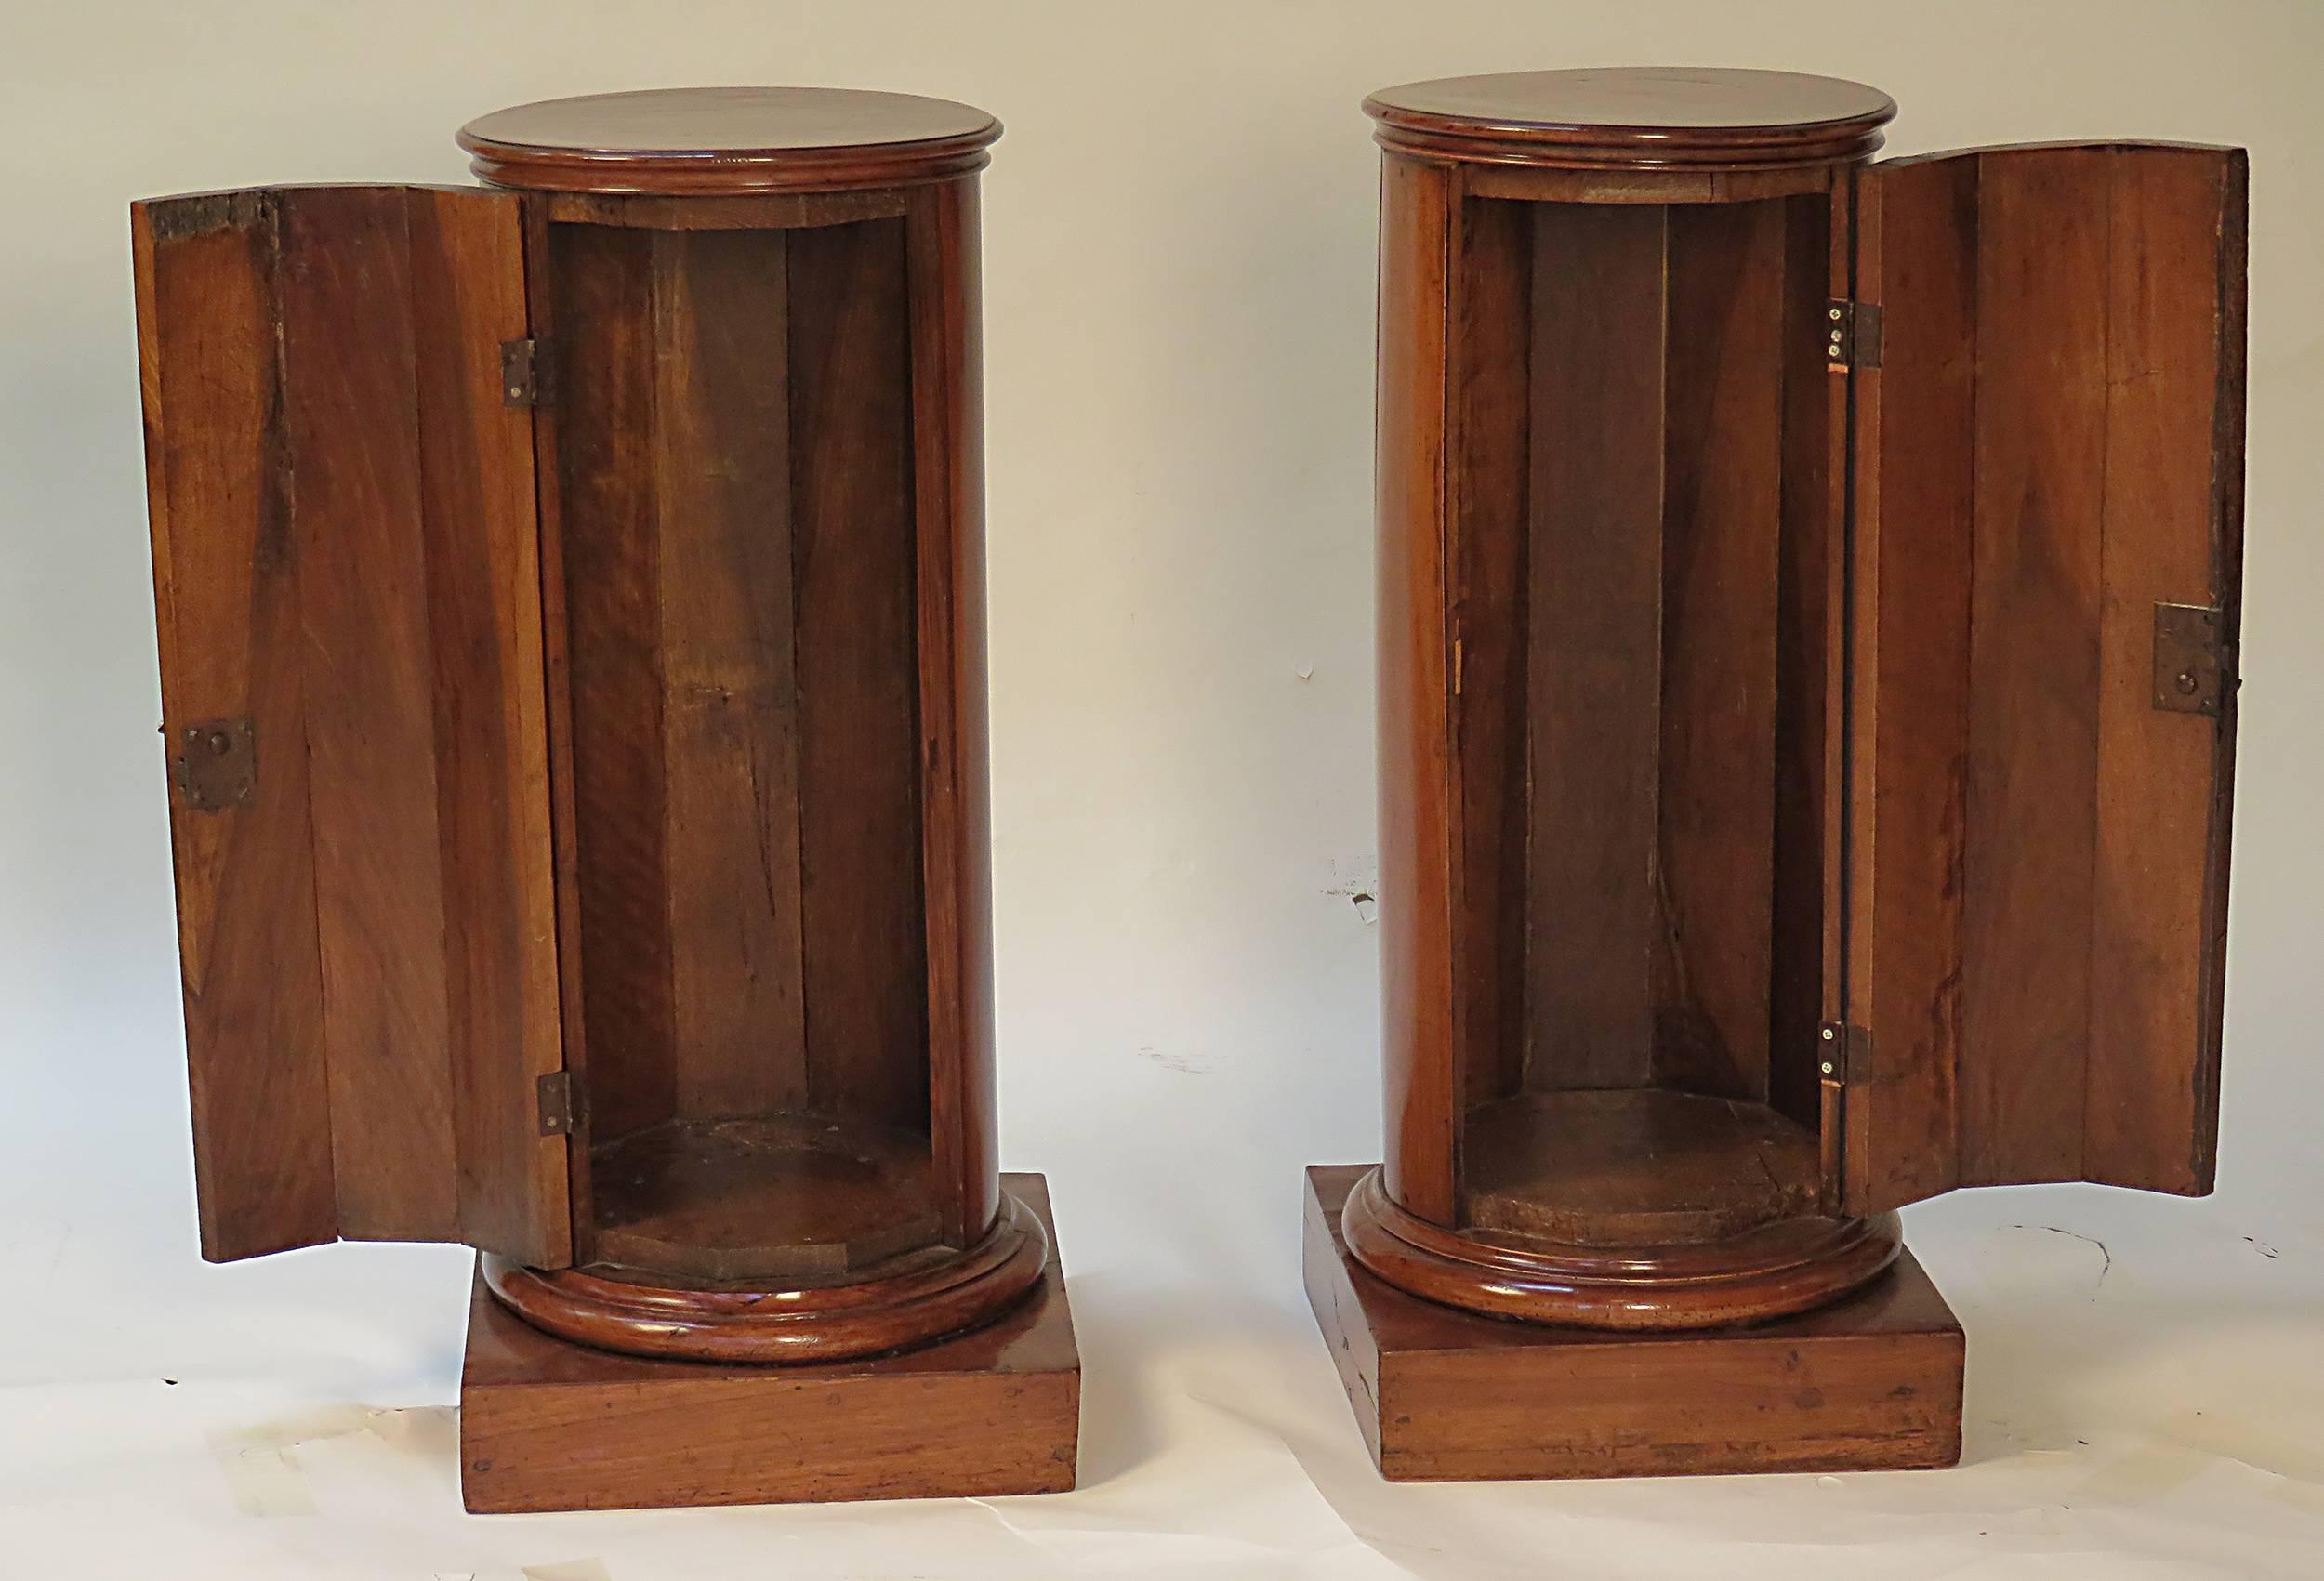 A rare and beautiful pair of 19th Century French Neoclassical fruit wood column cabinets made during the first half of the 19th Century, circa 1830. This wonderful pair would stand nicely on either side of a door or make excellent nightstands where